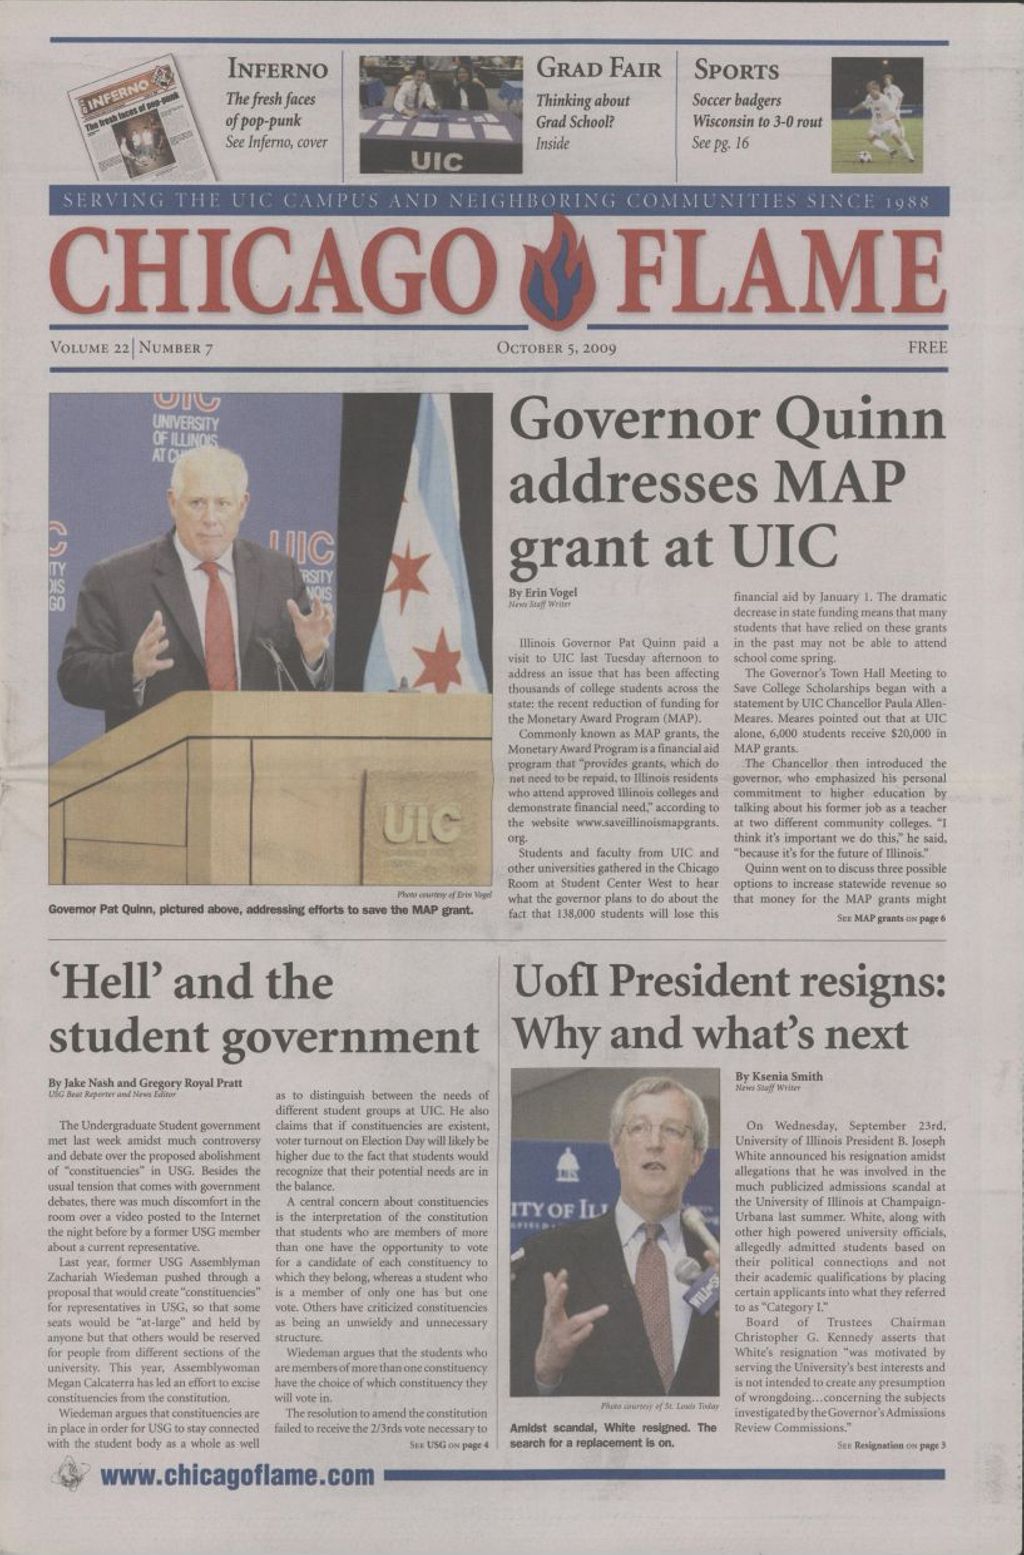 Miniature of Chicago Flame (October 5, 2009)